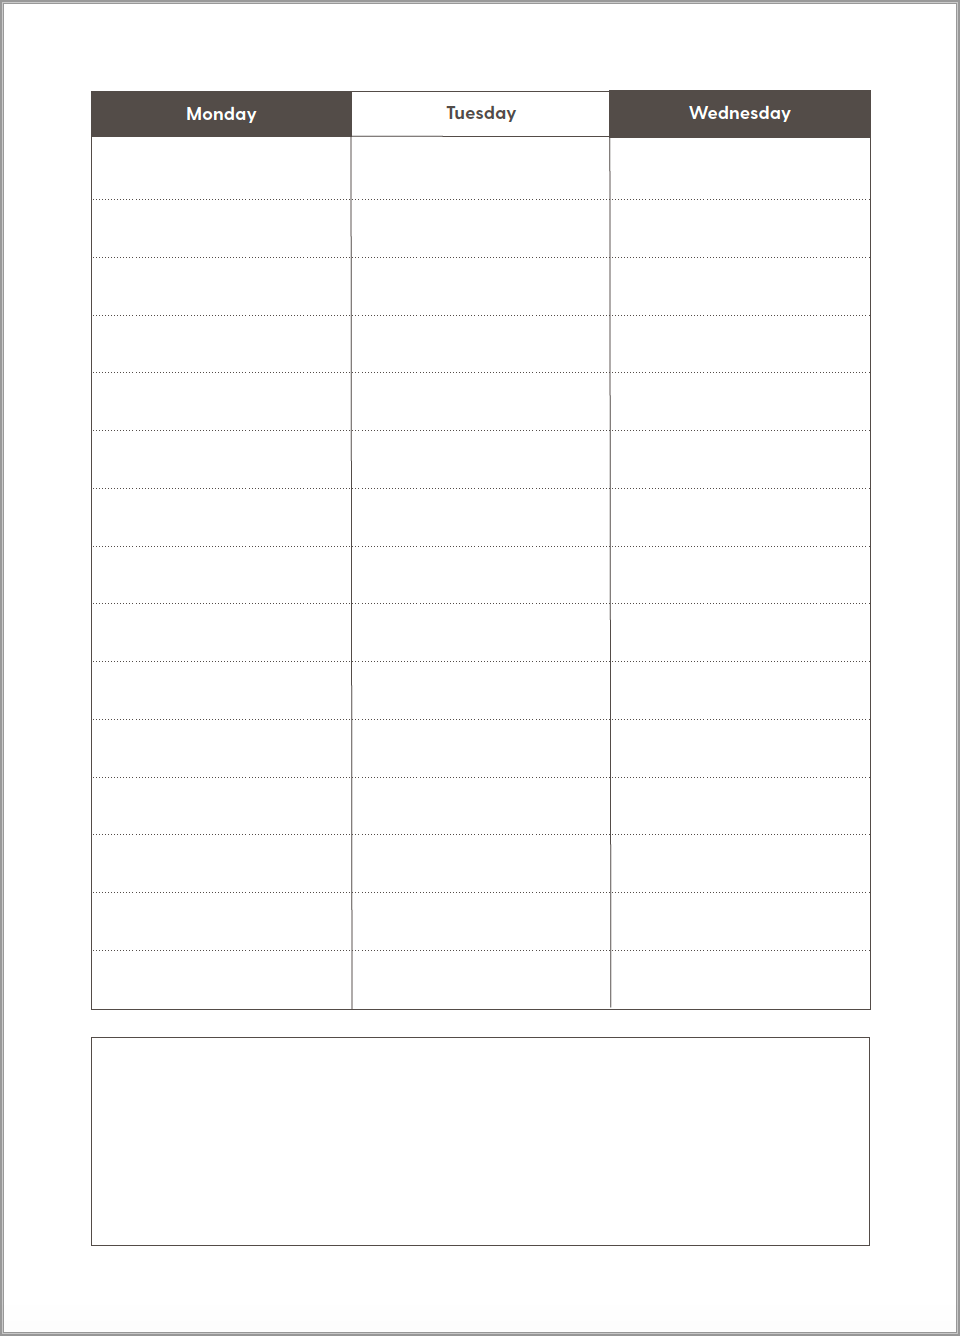 Undated Planner Monthly and Weekly Layouts Agenda 52 White Binder 